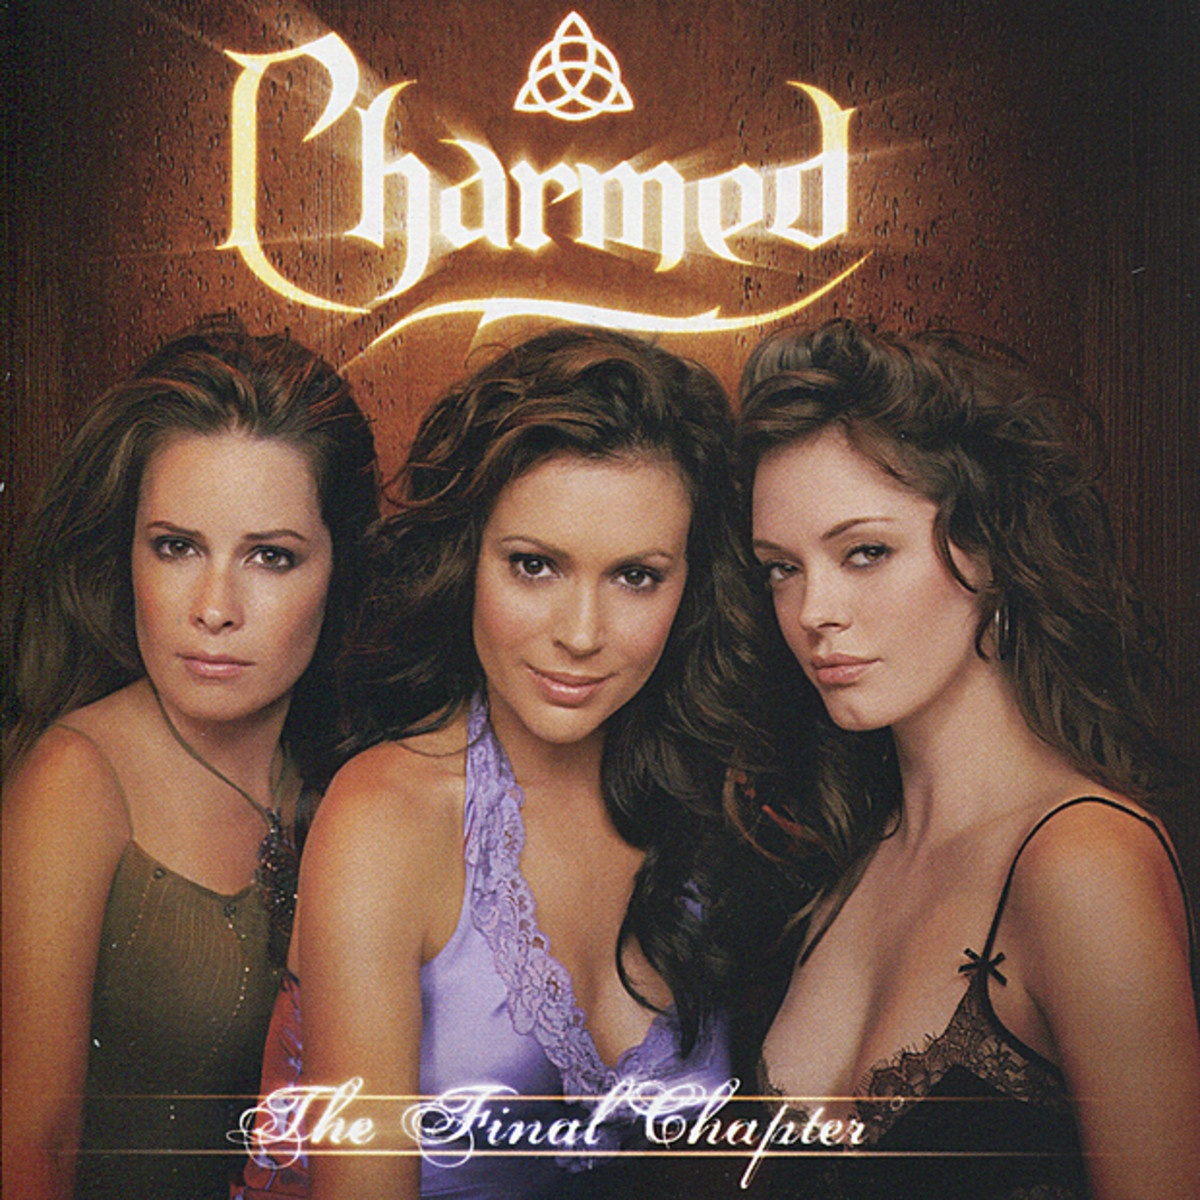 Charmed: The Final Chapter